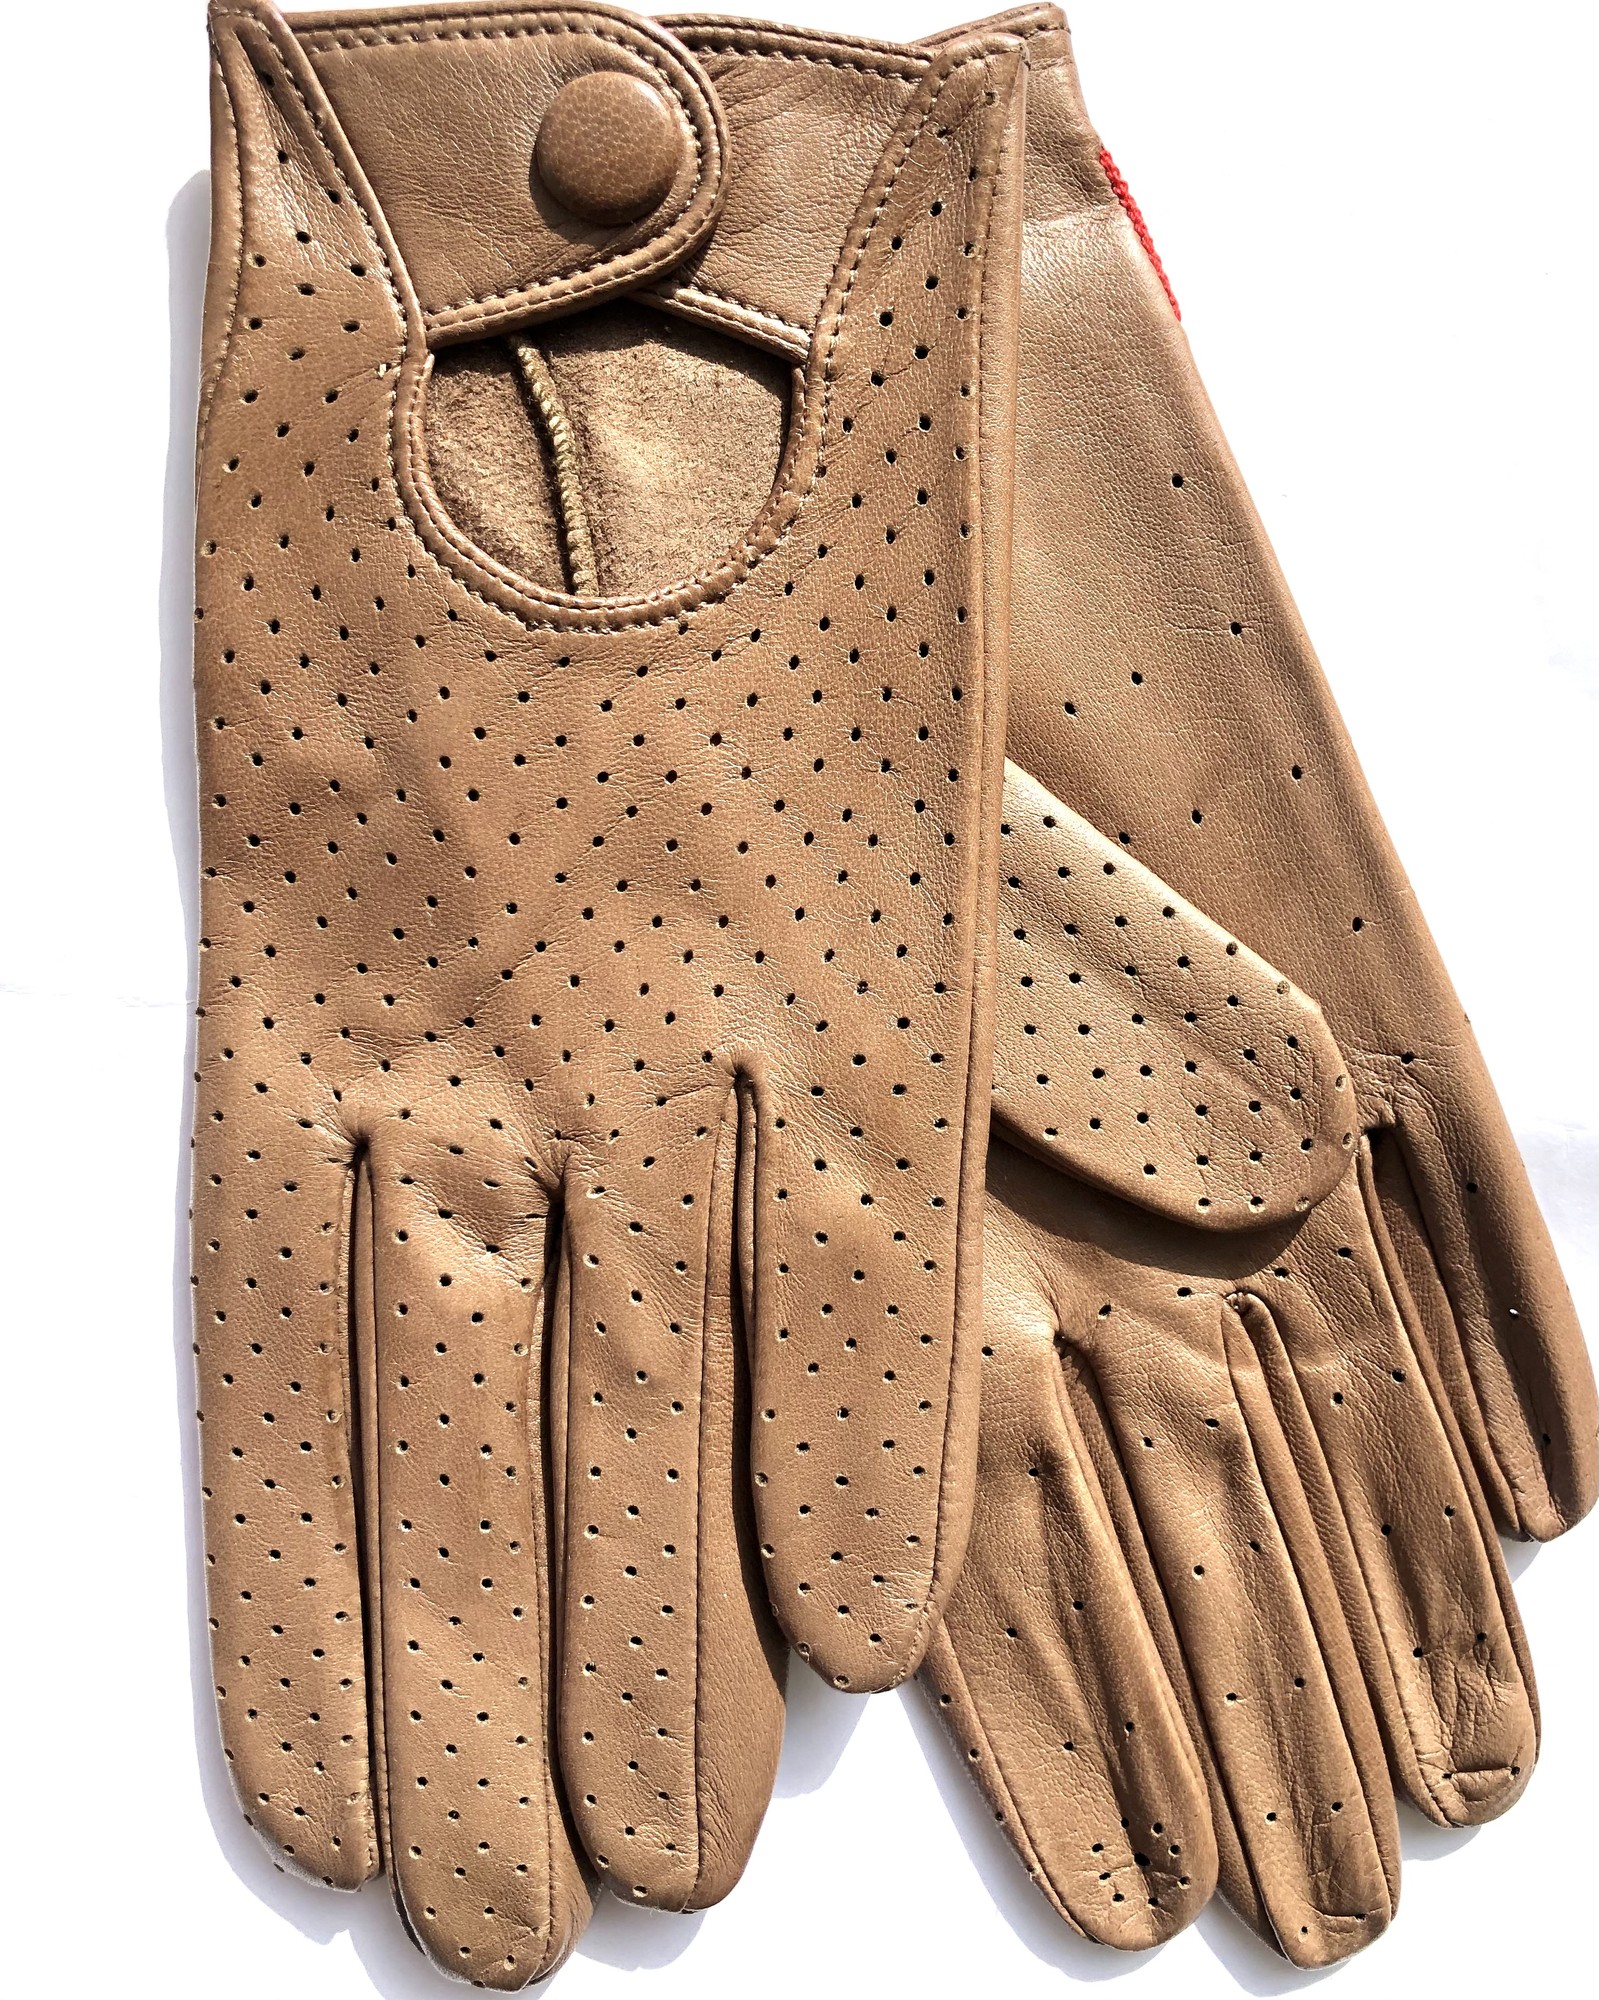 Women's  leather driving gloves